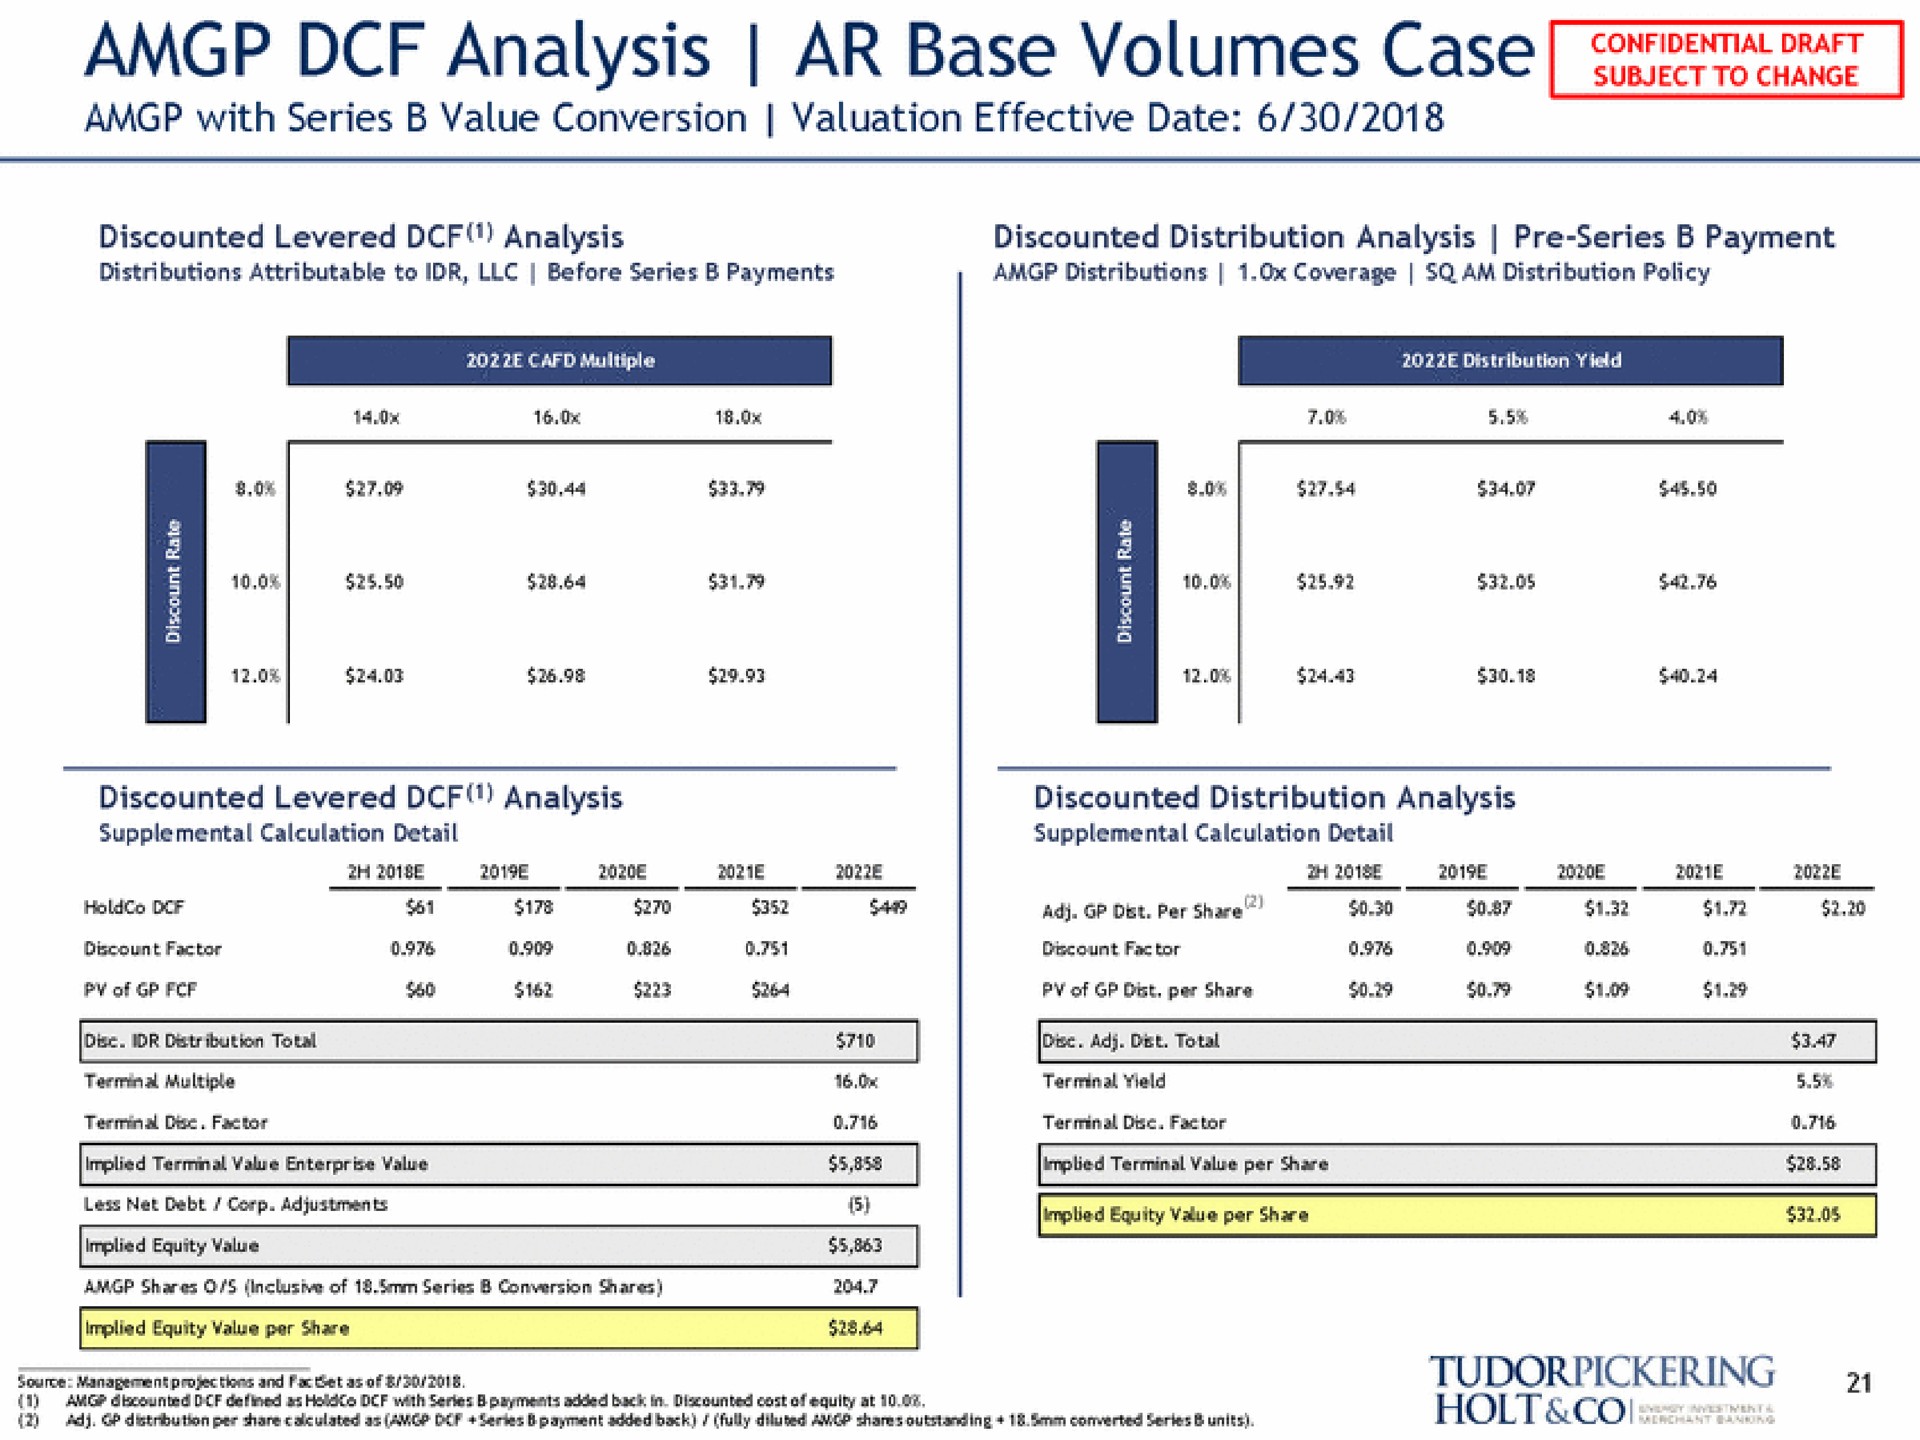 analysis base volumes case with series value conversion valuation effective date a | Tudor, Pickering, Holt & Co